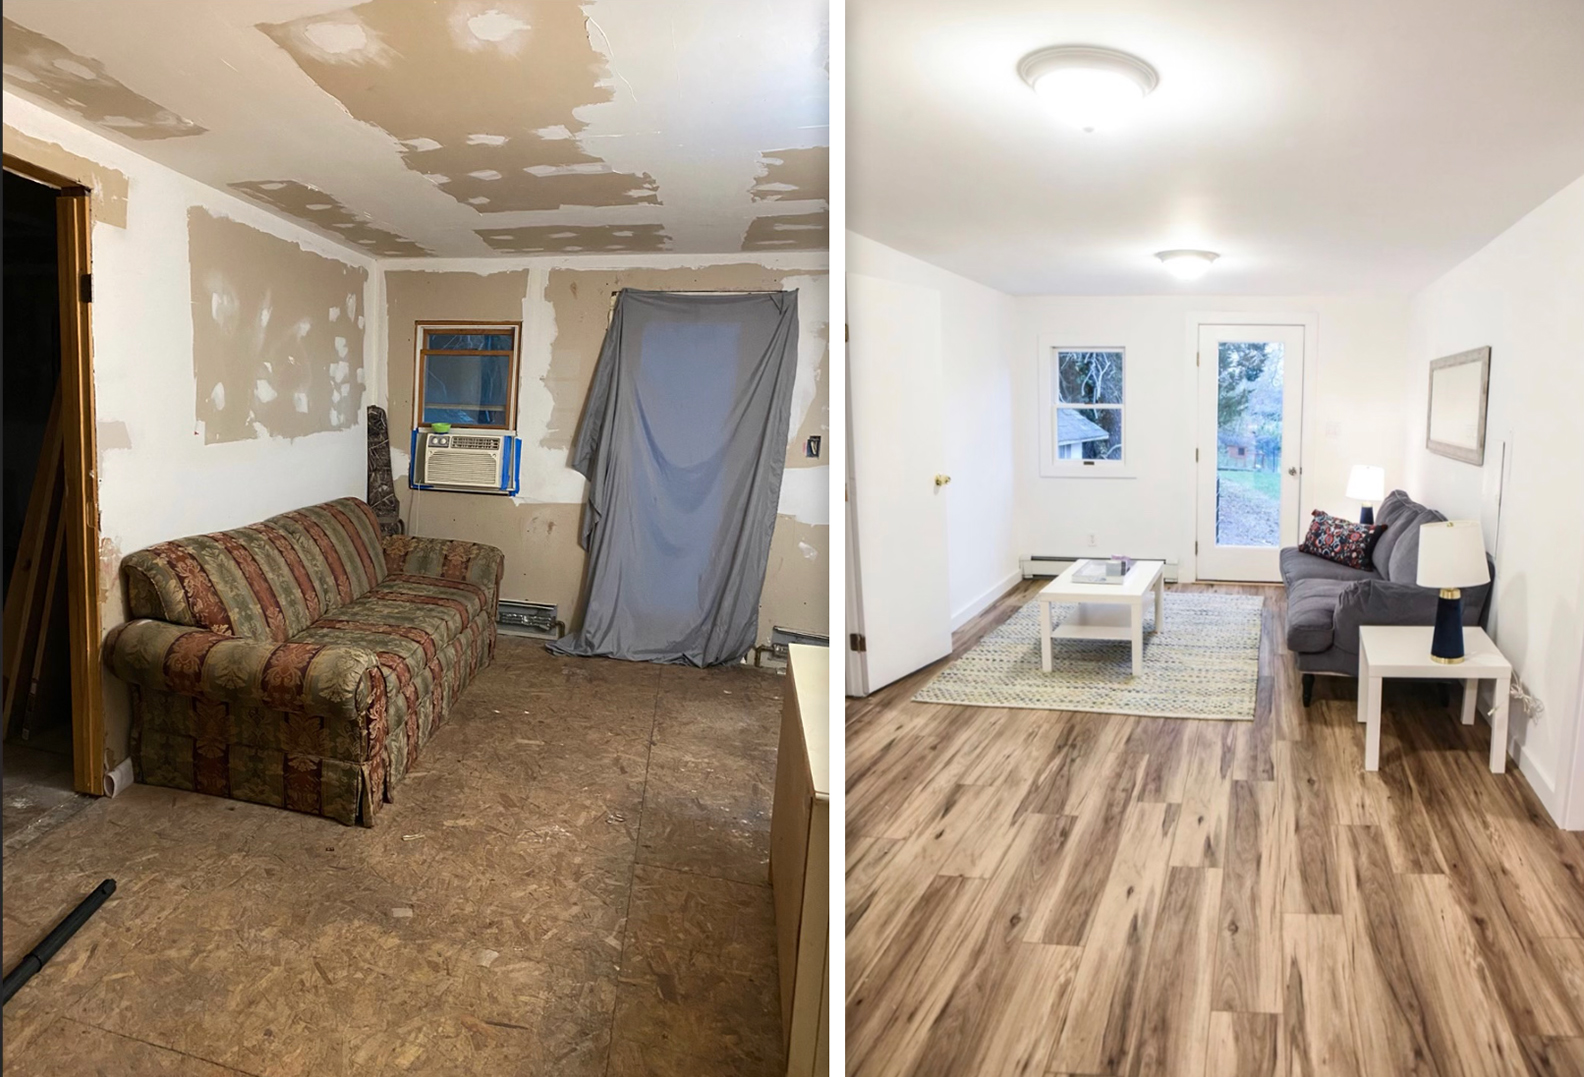 Before and after shots of a home repaired by Hamptons Community Outreach